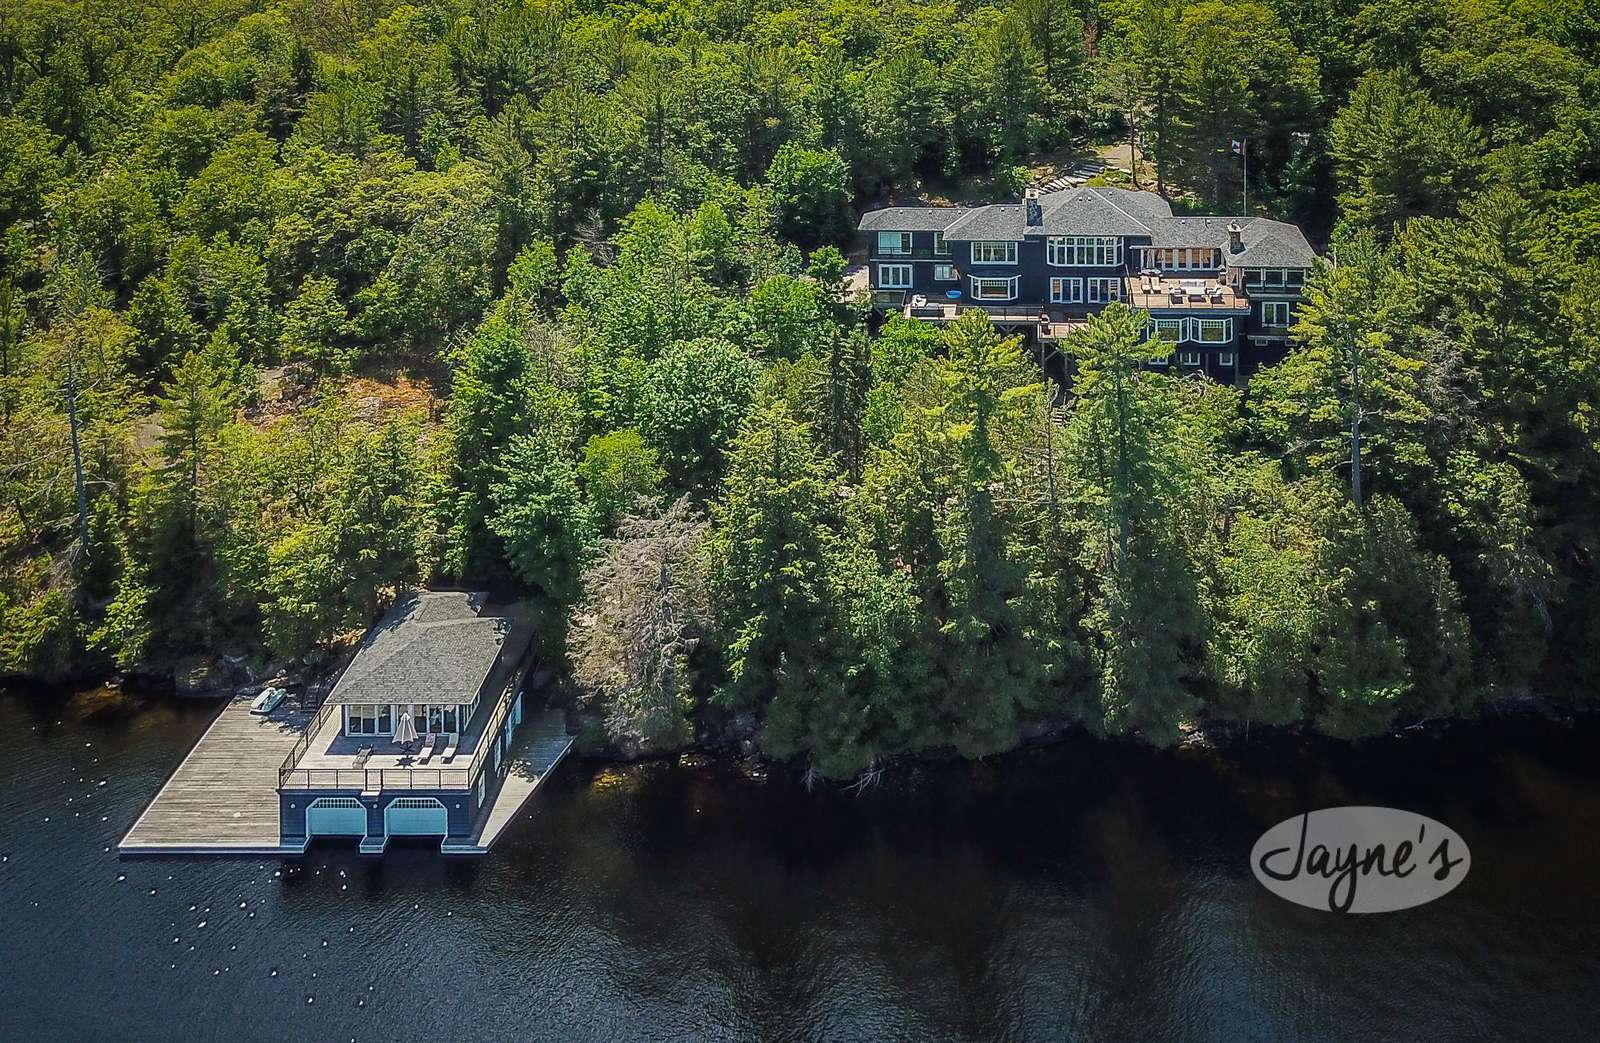 King Arthur's Court in Port Carling - Jayne's Luxurious Rentals | Aerial view of a grand lakeside property with a spacious boathouse